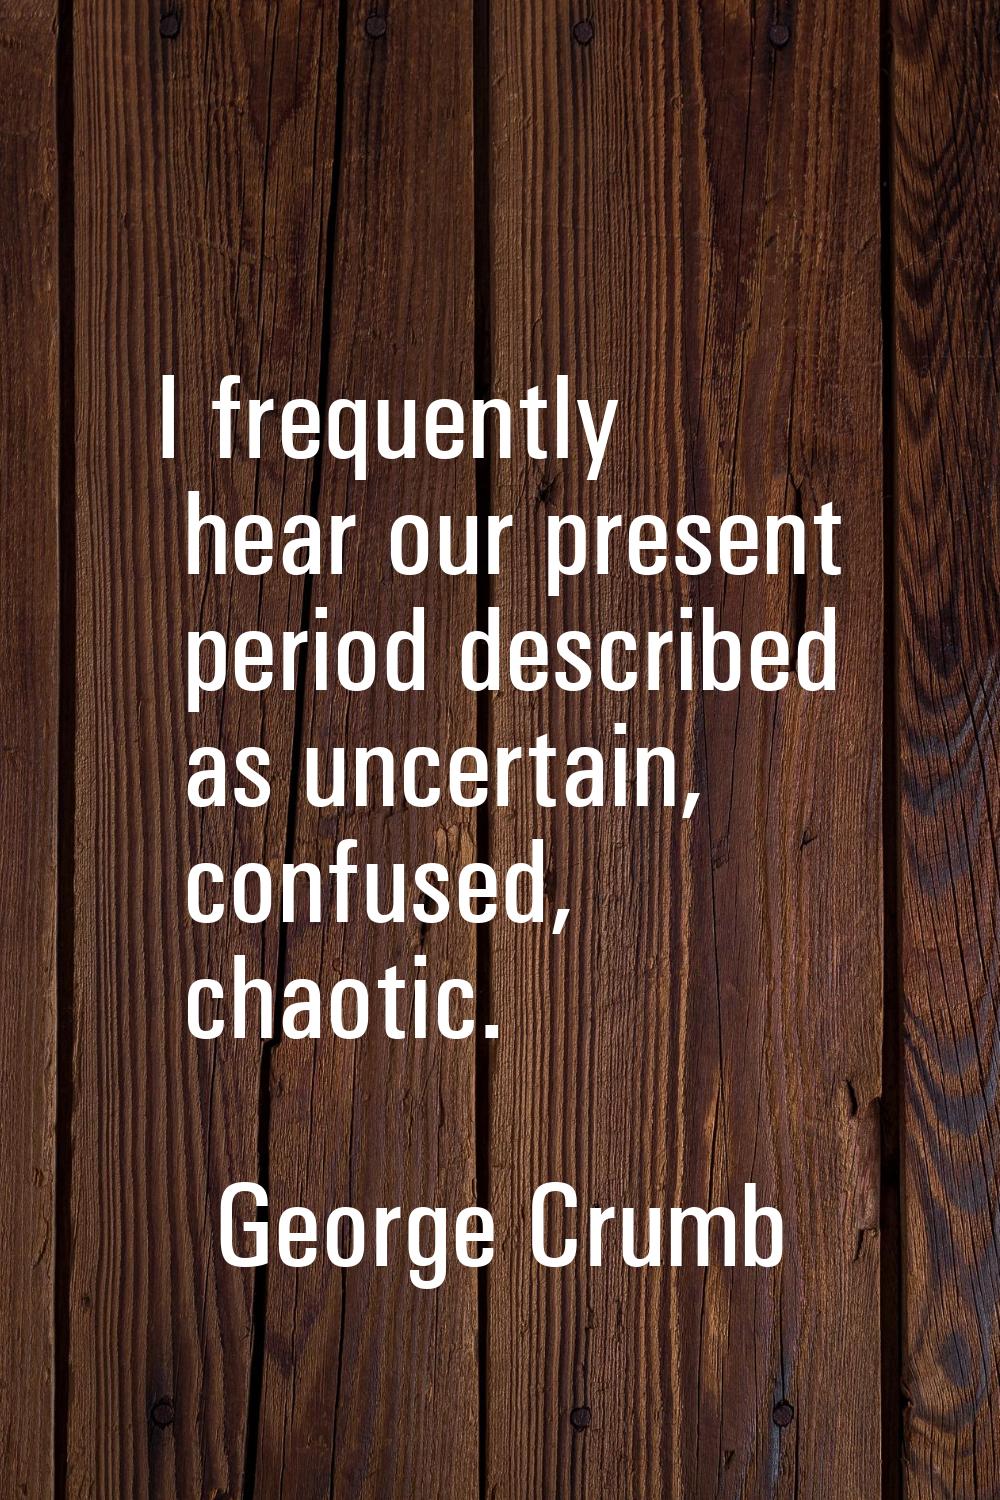 I frequently hear our present period described as uncertain, confused, chaotic.